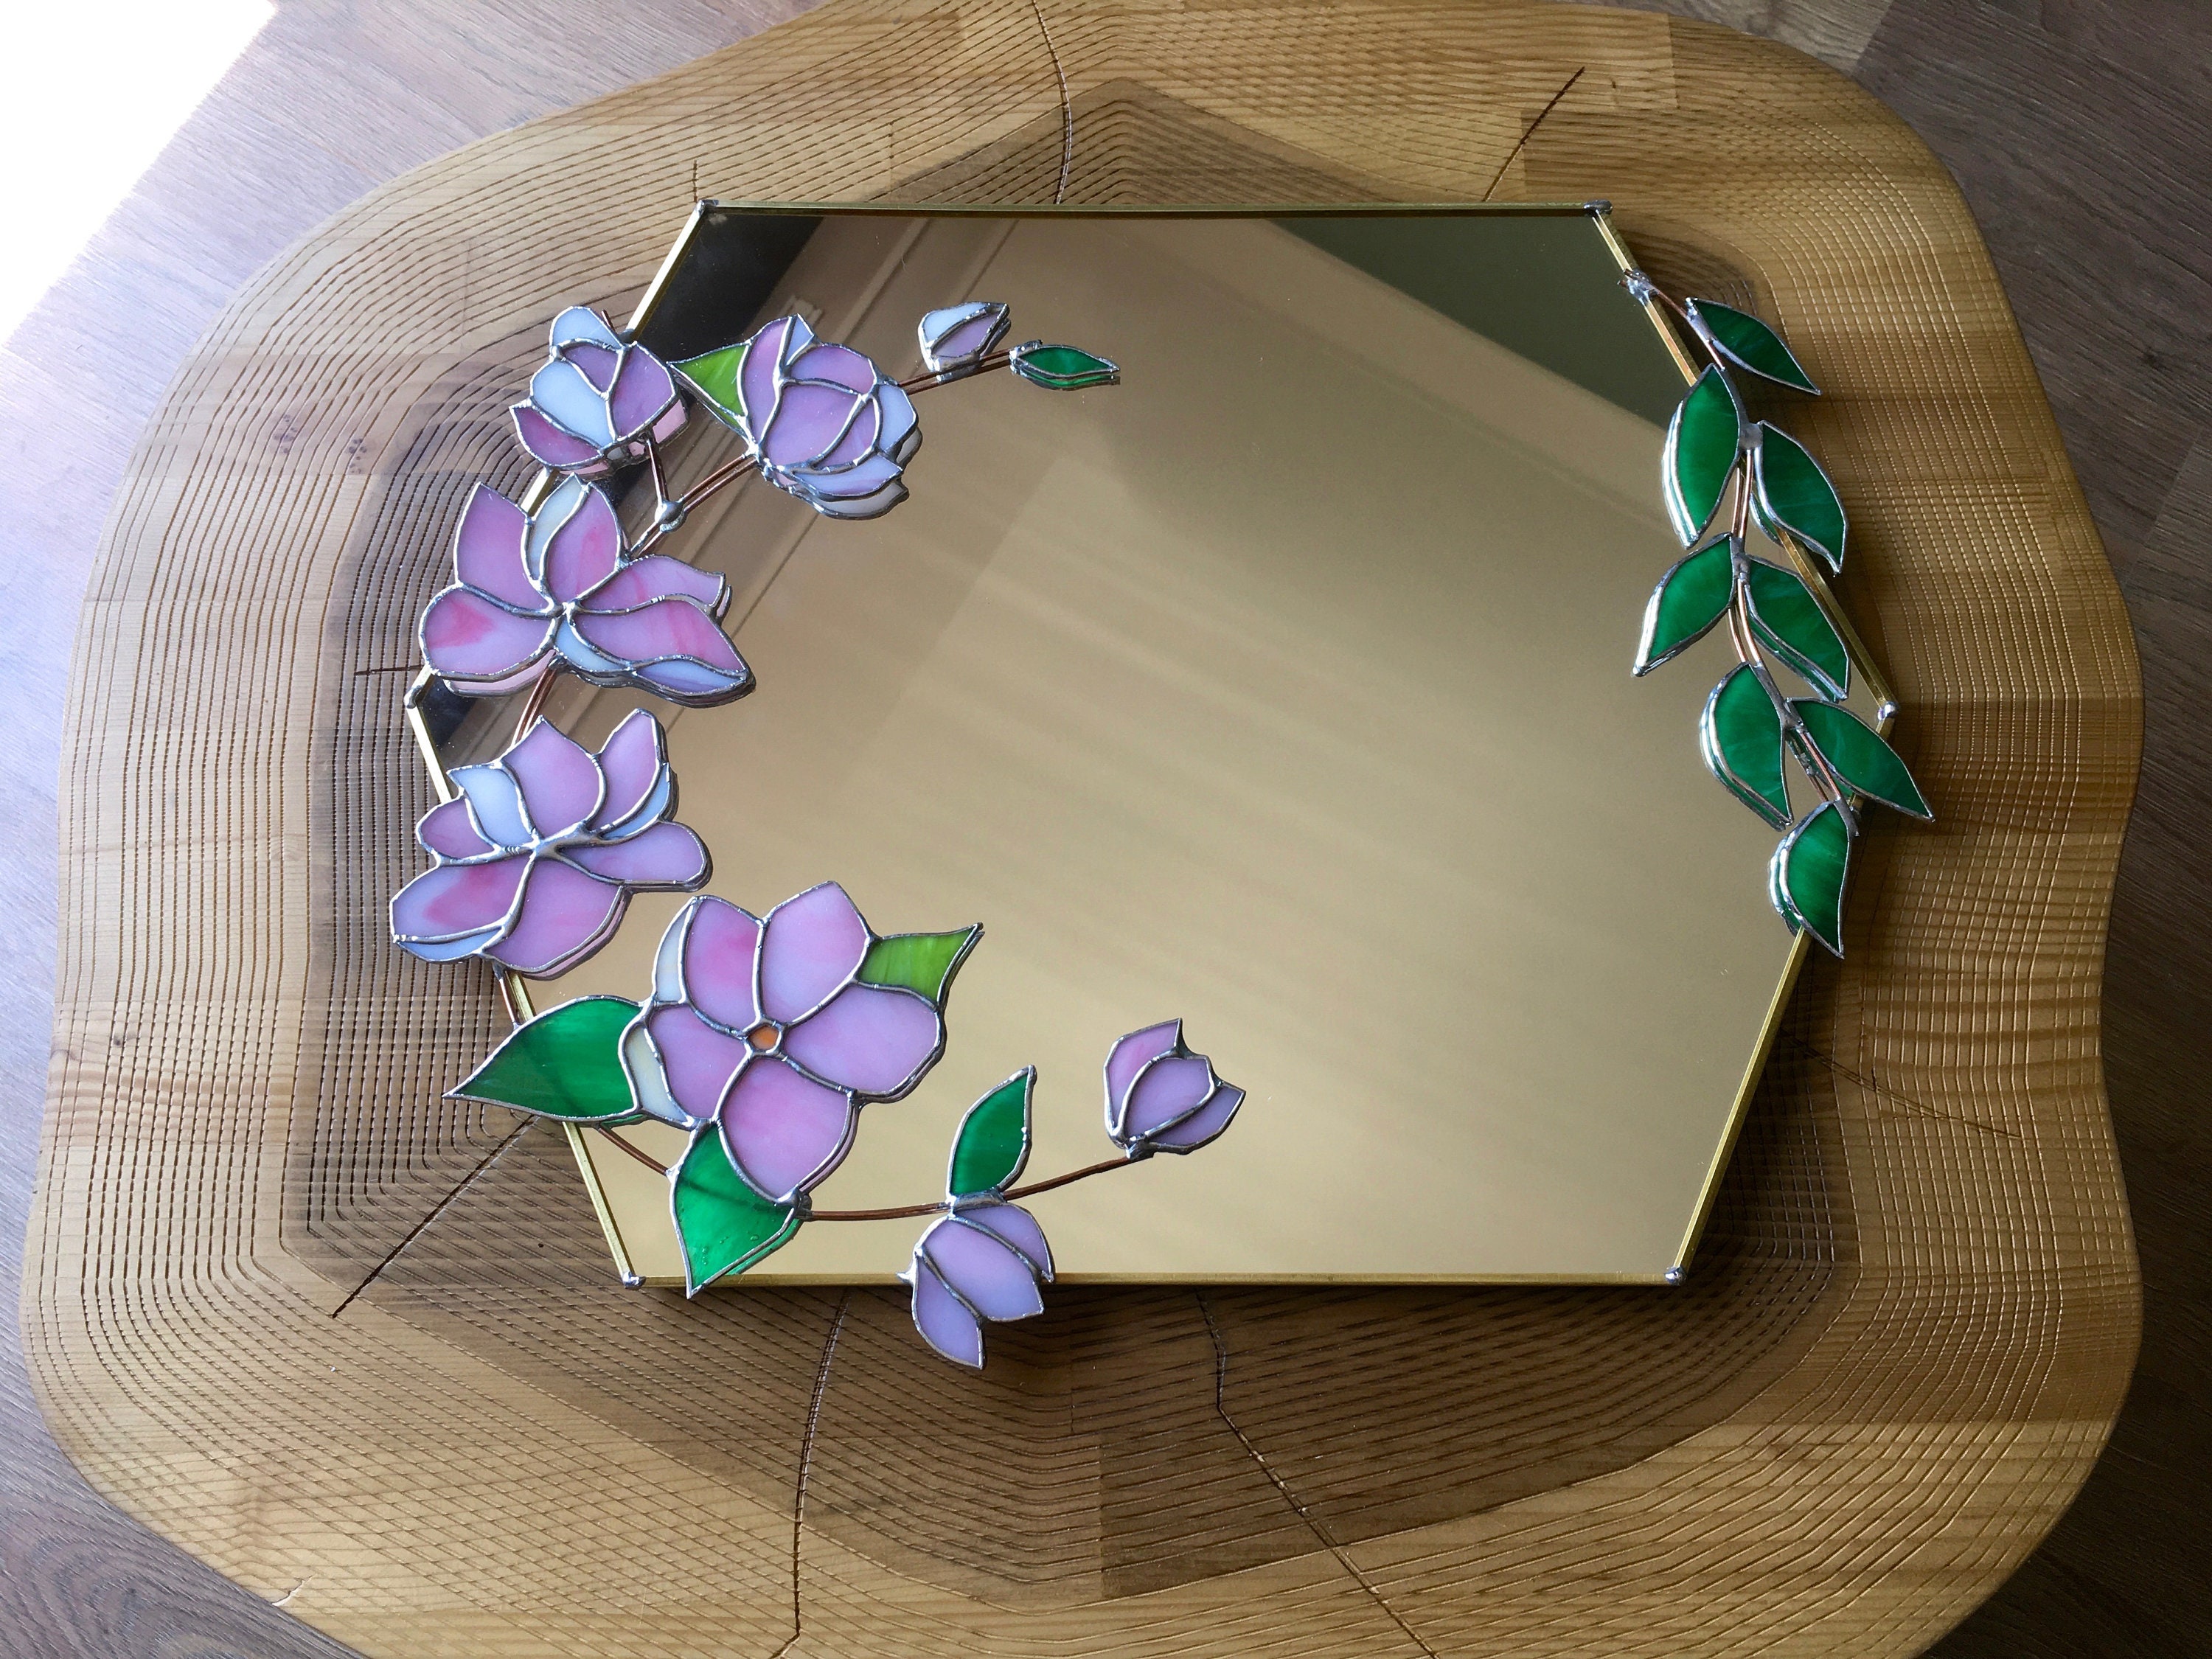 Boehm Stained Glass Blog: Stained Glass Floral Mirror Repair